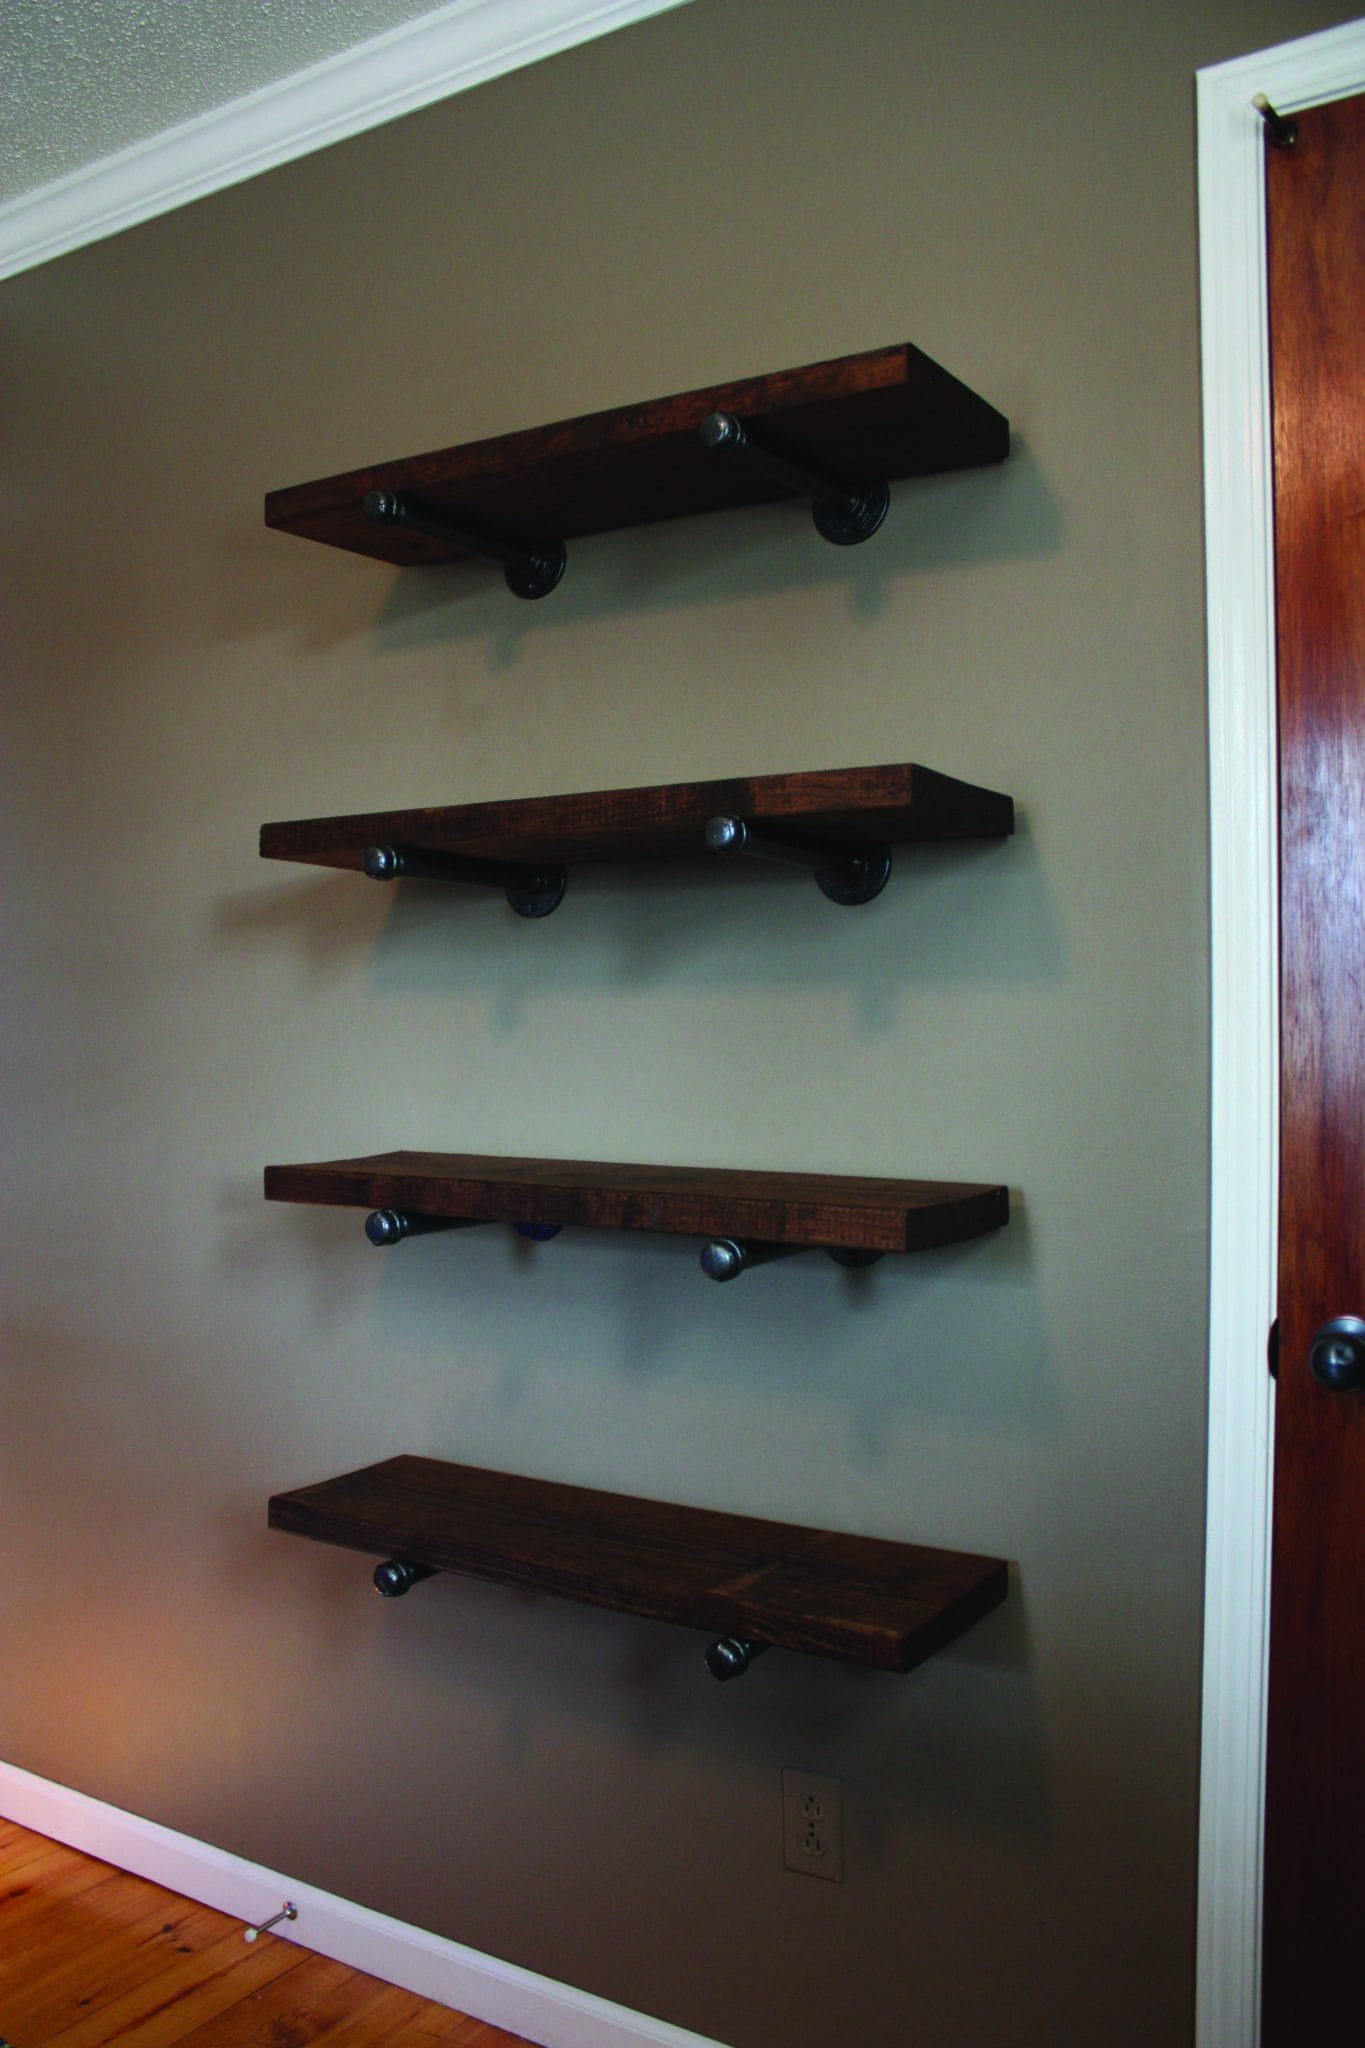 Pipe Bracket Shelving Extreme How To, Black Pipe Shelving Plans